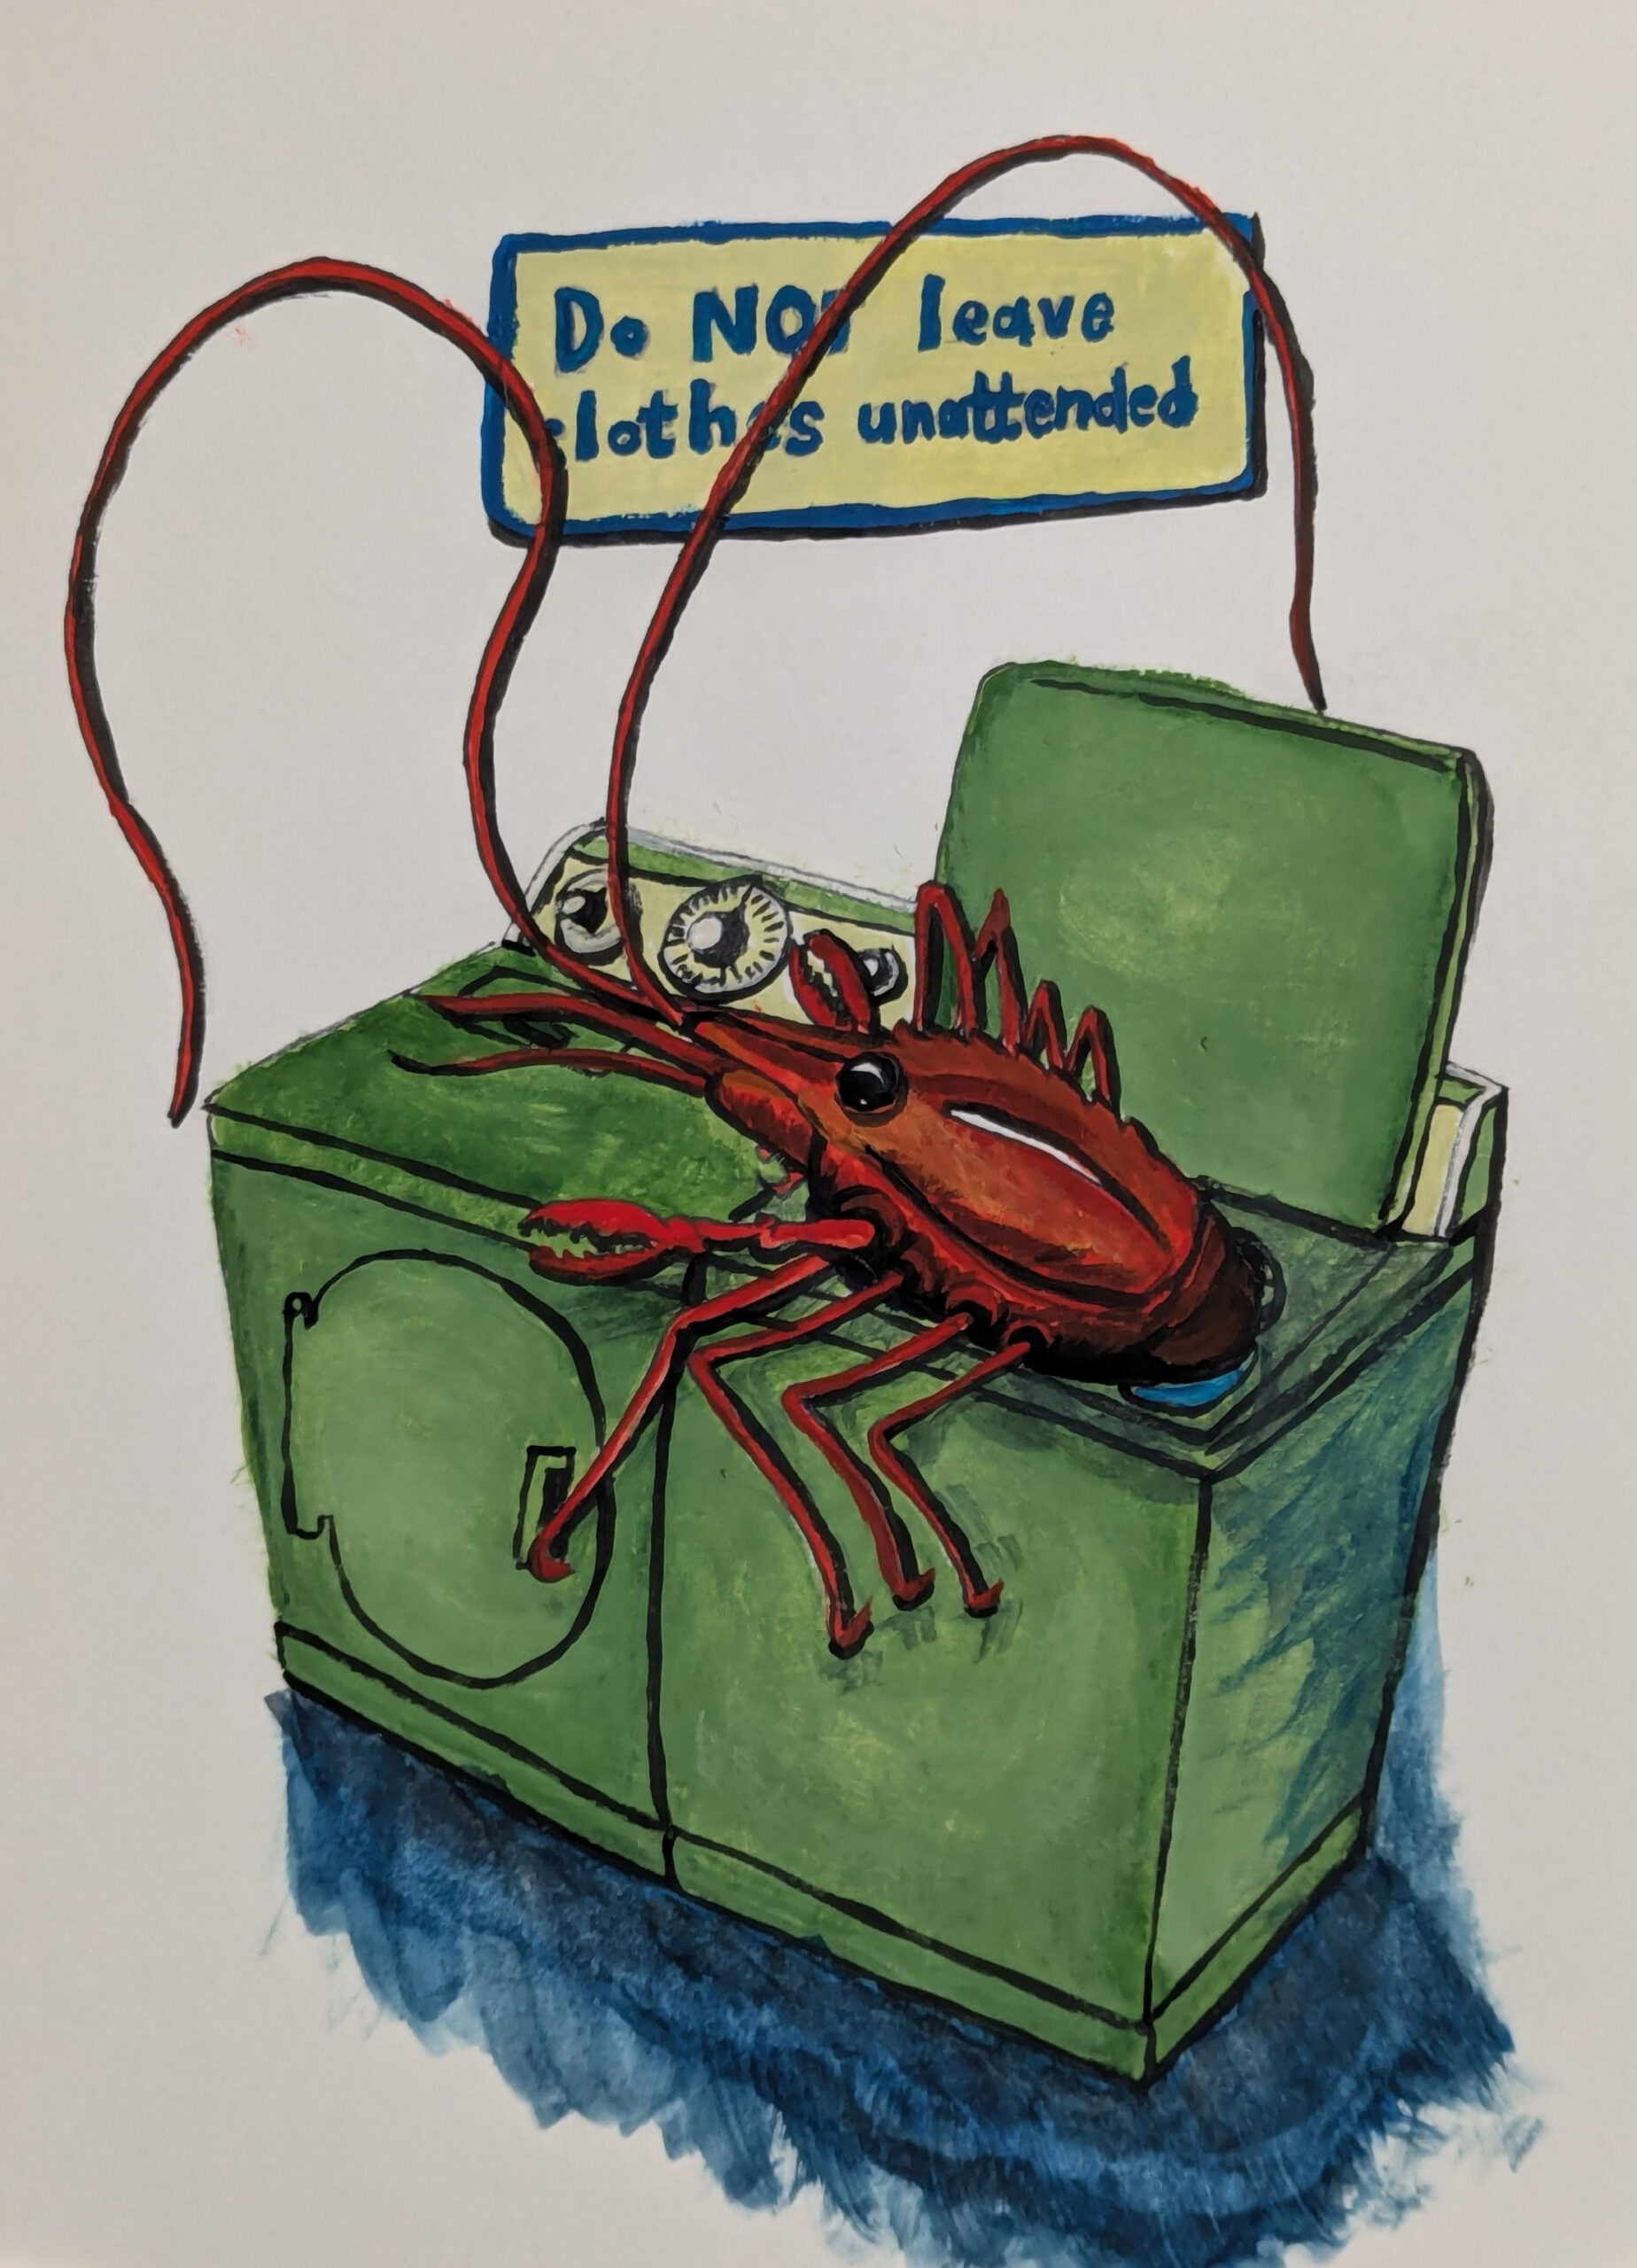 Giant Shrimp in the Laundry Room painted in gouache on 9x12 140 lb watercolor paper